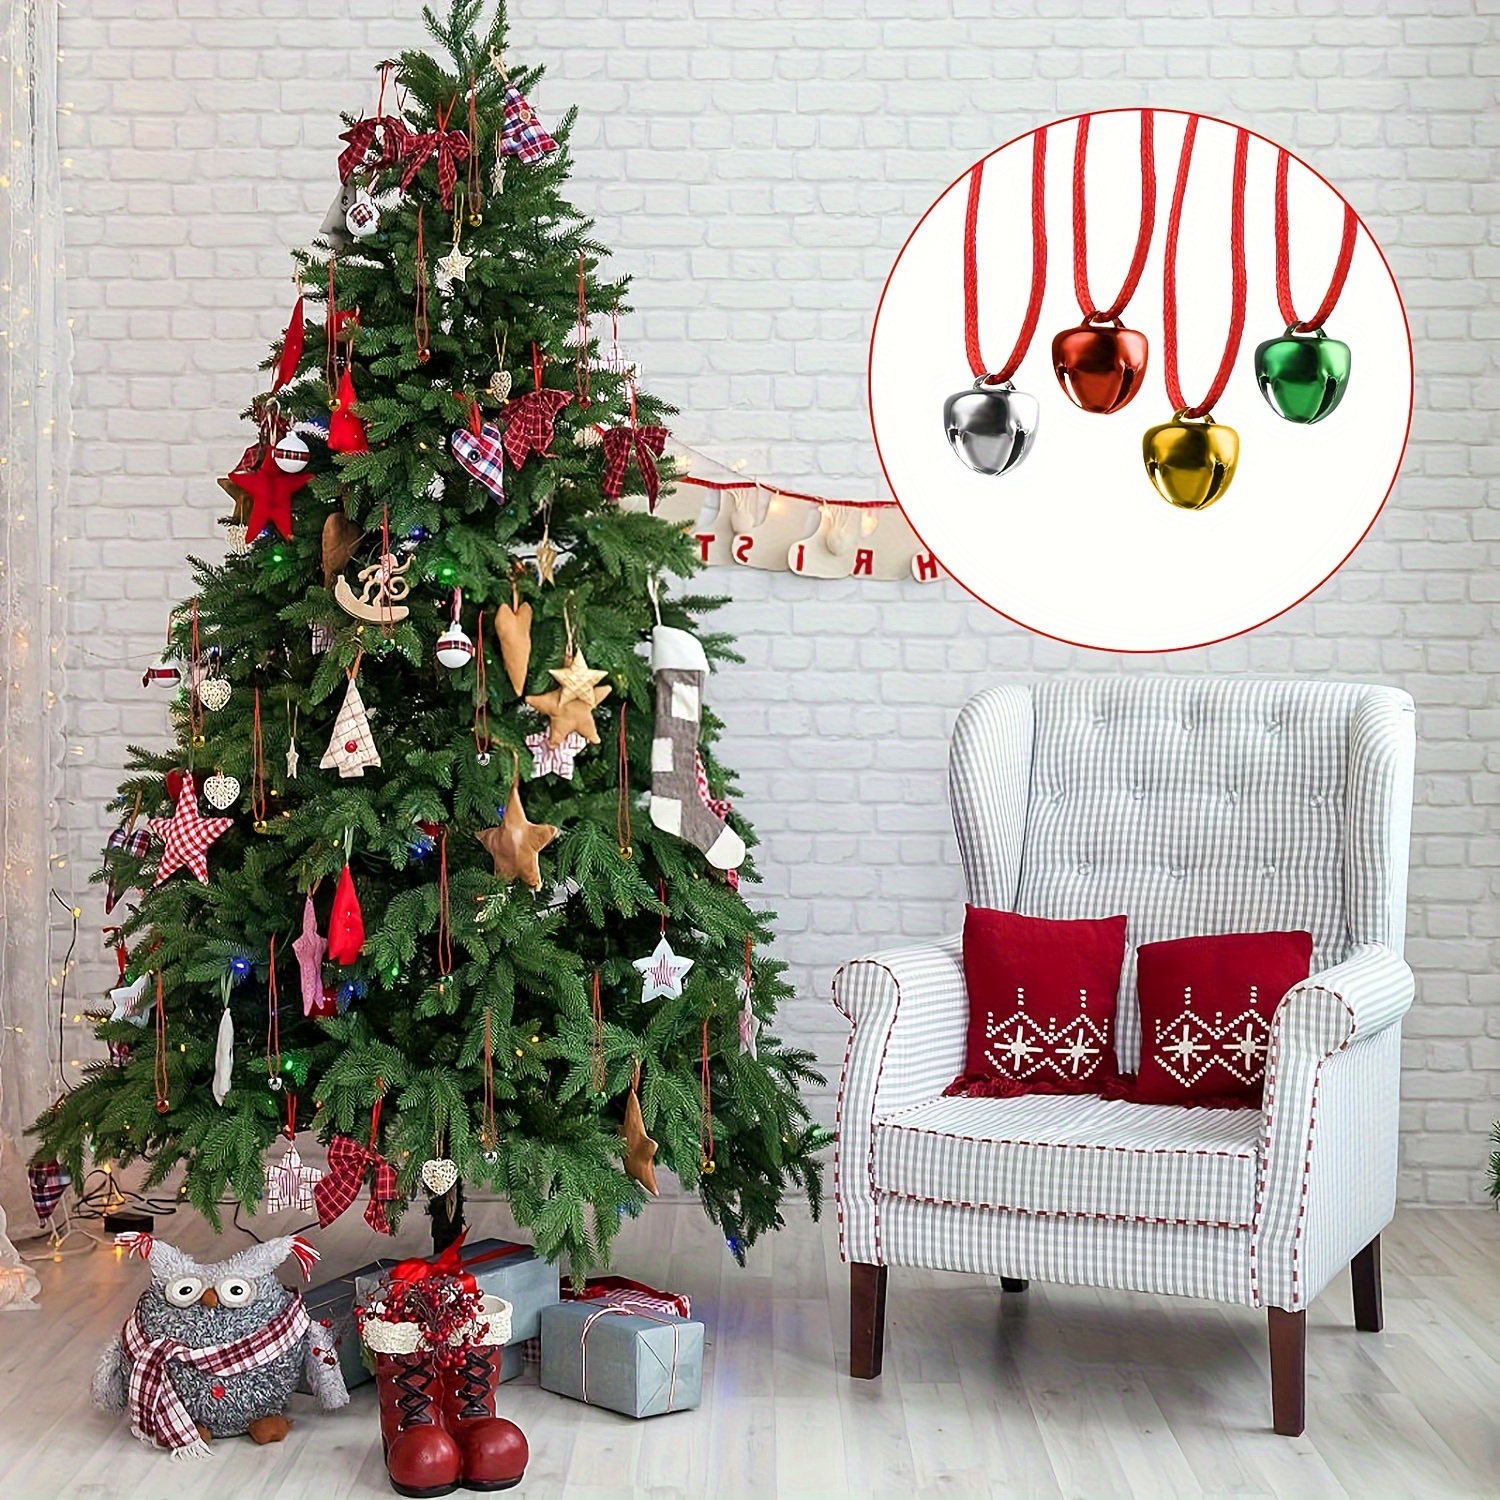 Jingle Bells, Christmas Bells With Cords, Colorful Diy Mini Craft